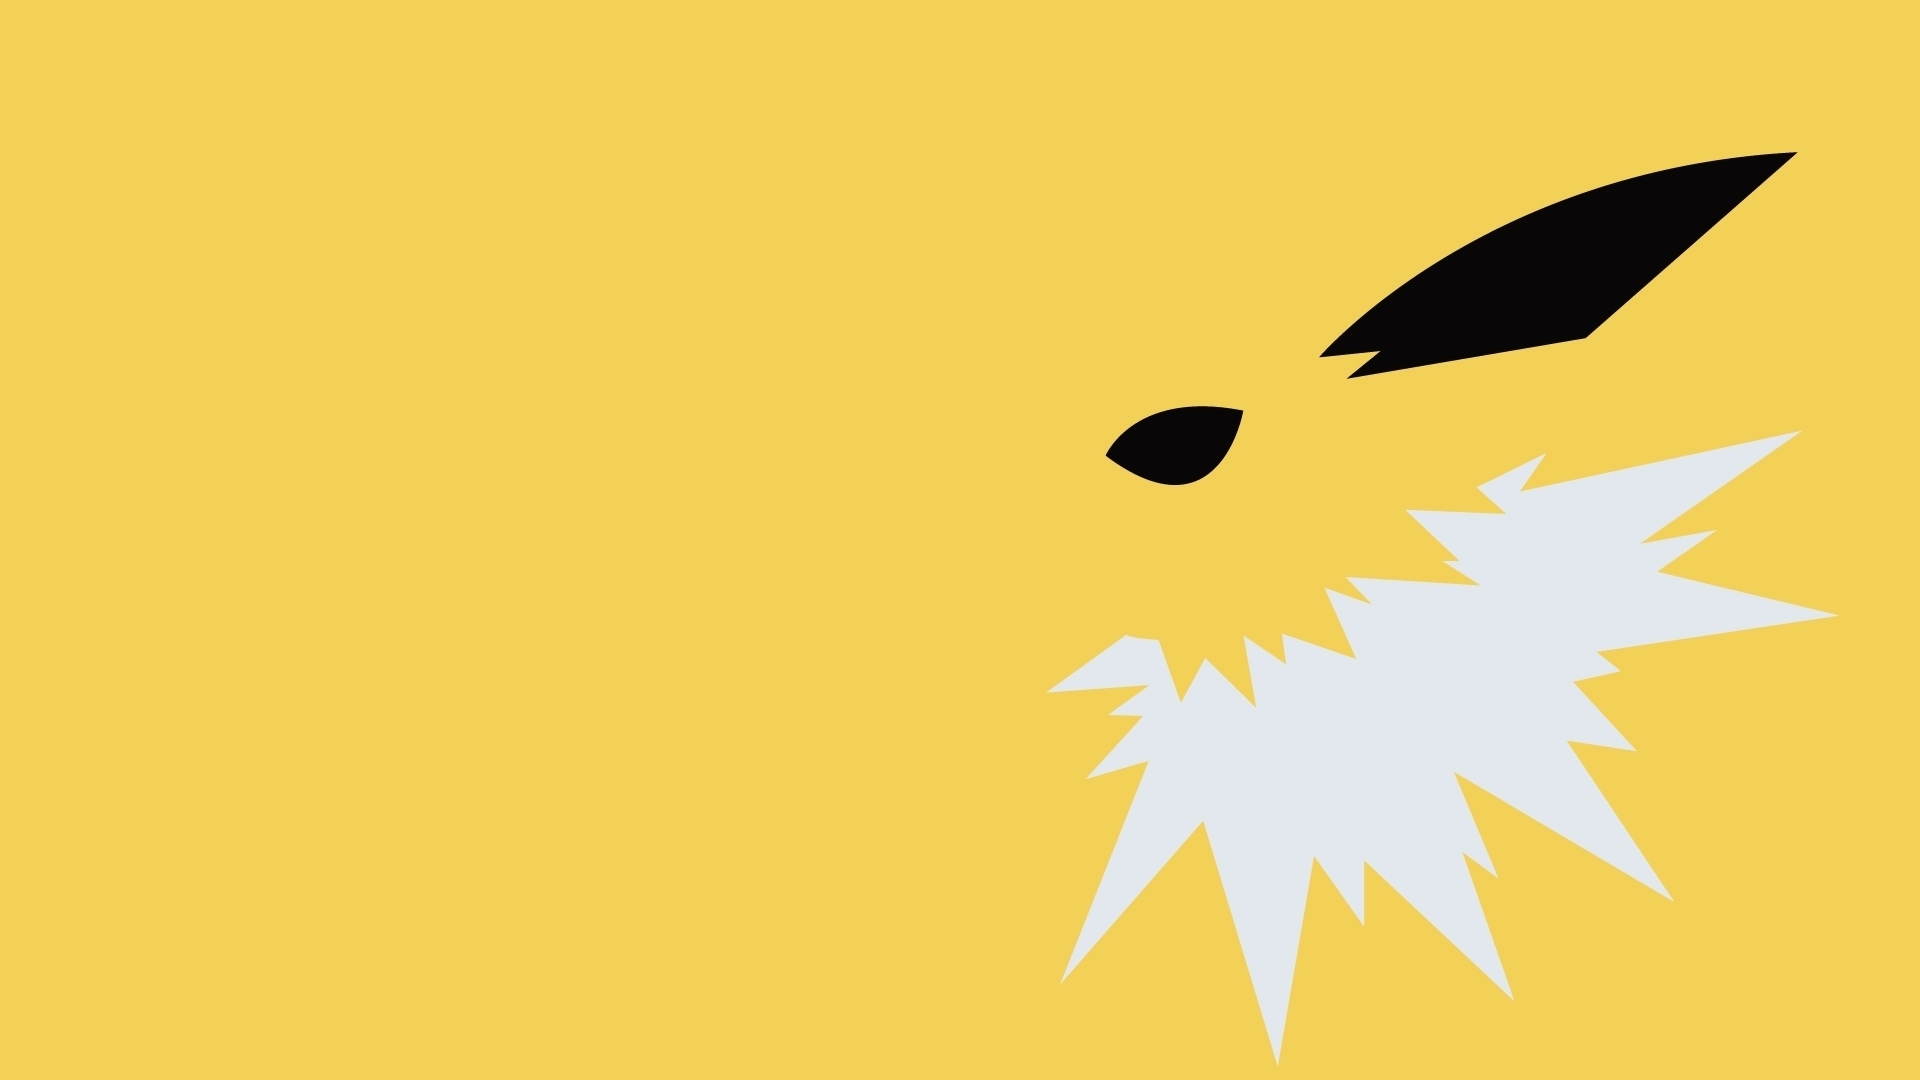 Jolteon 4K wallpaper for your desktop or mobile screen free and easy to download